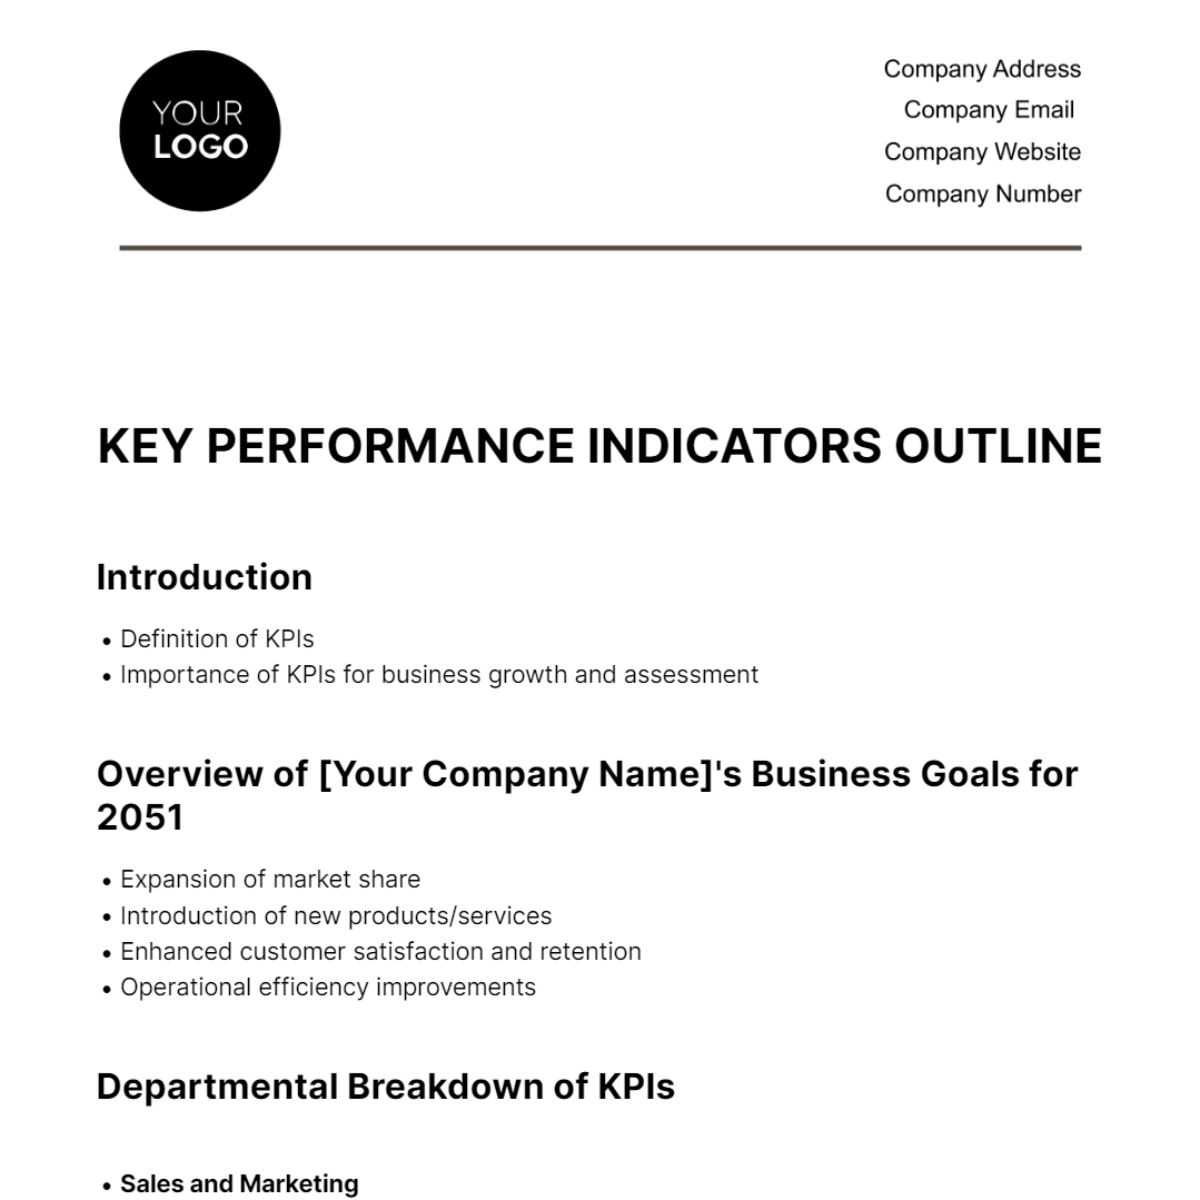 Free Key Performance Indicators Outline HR Template